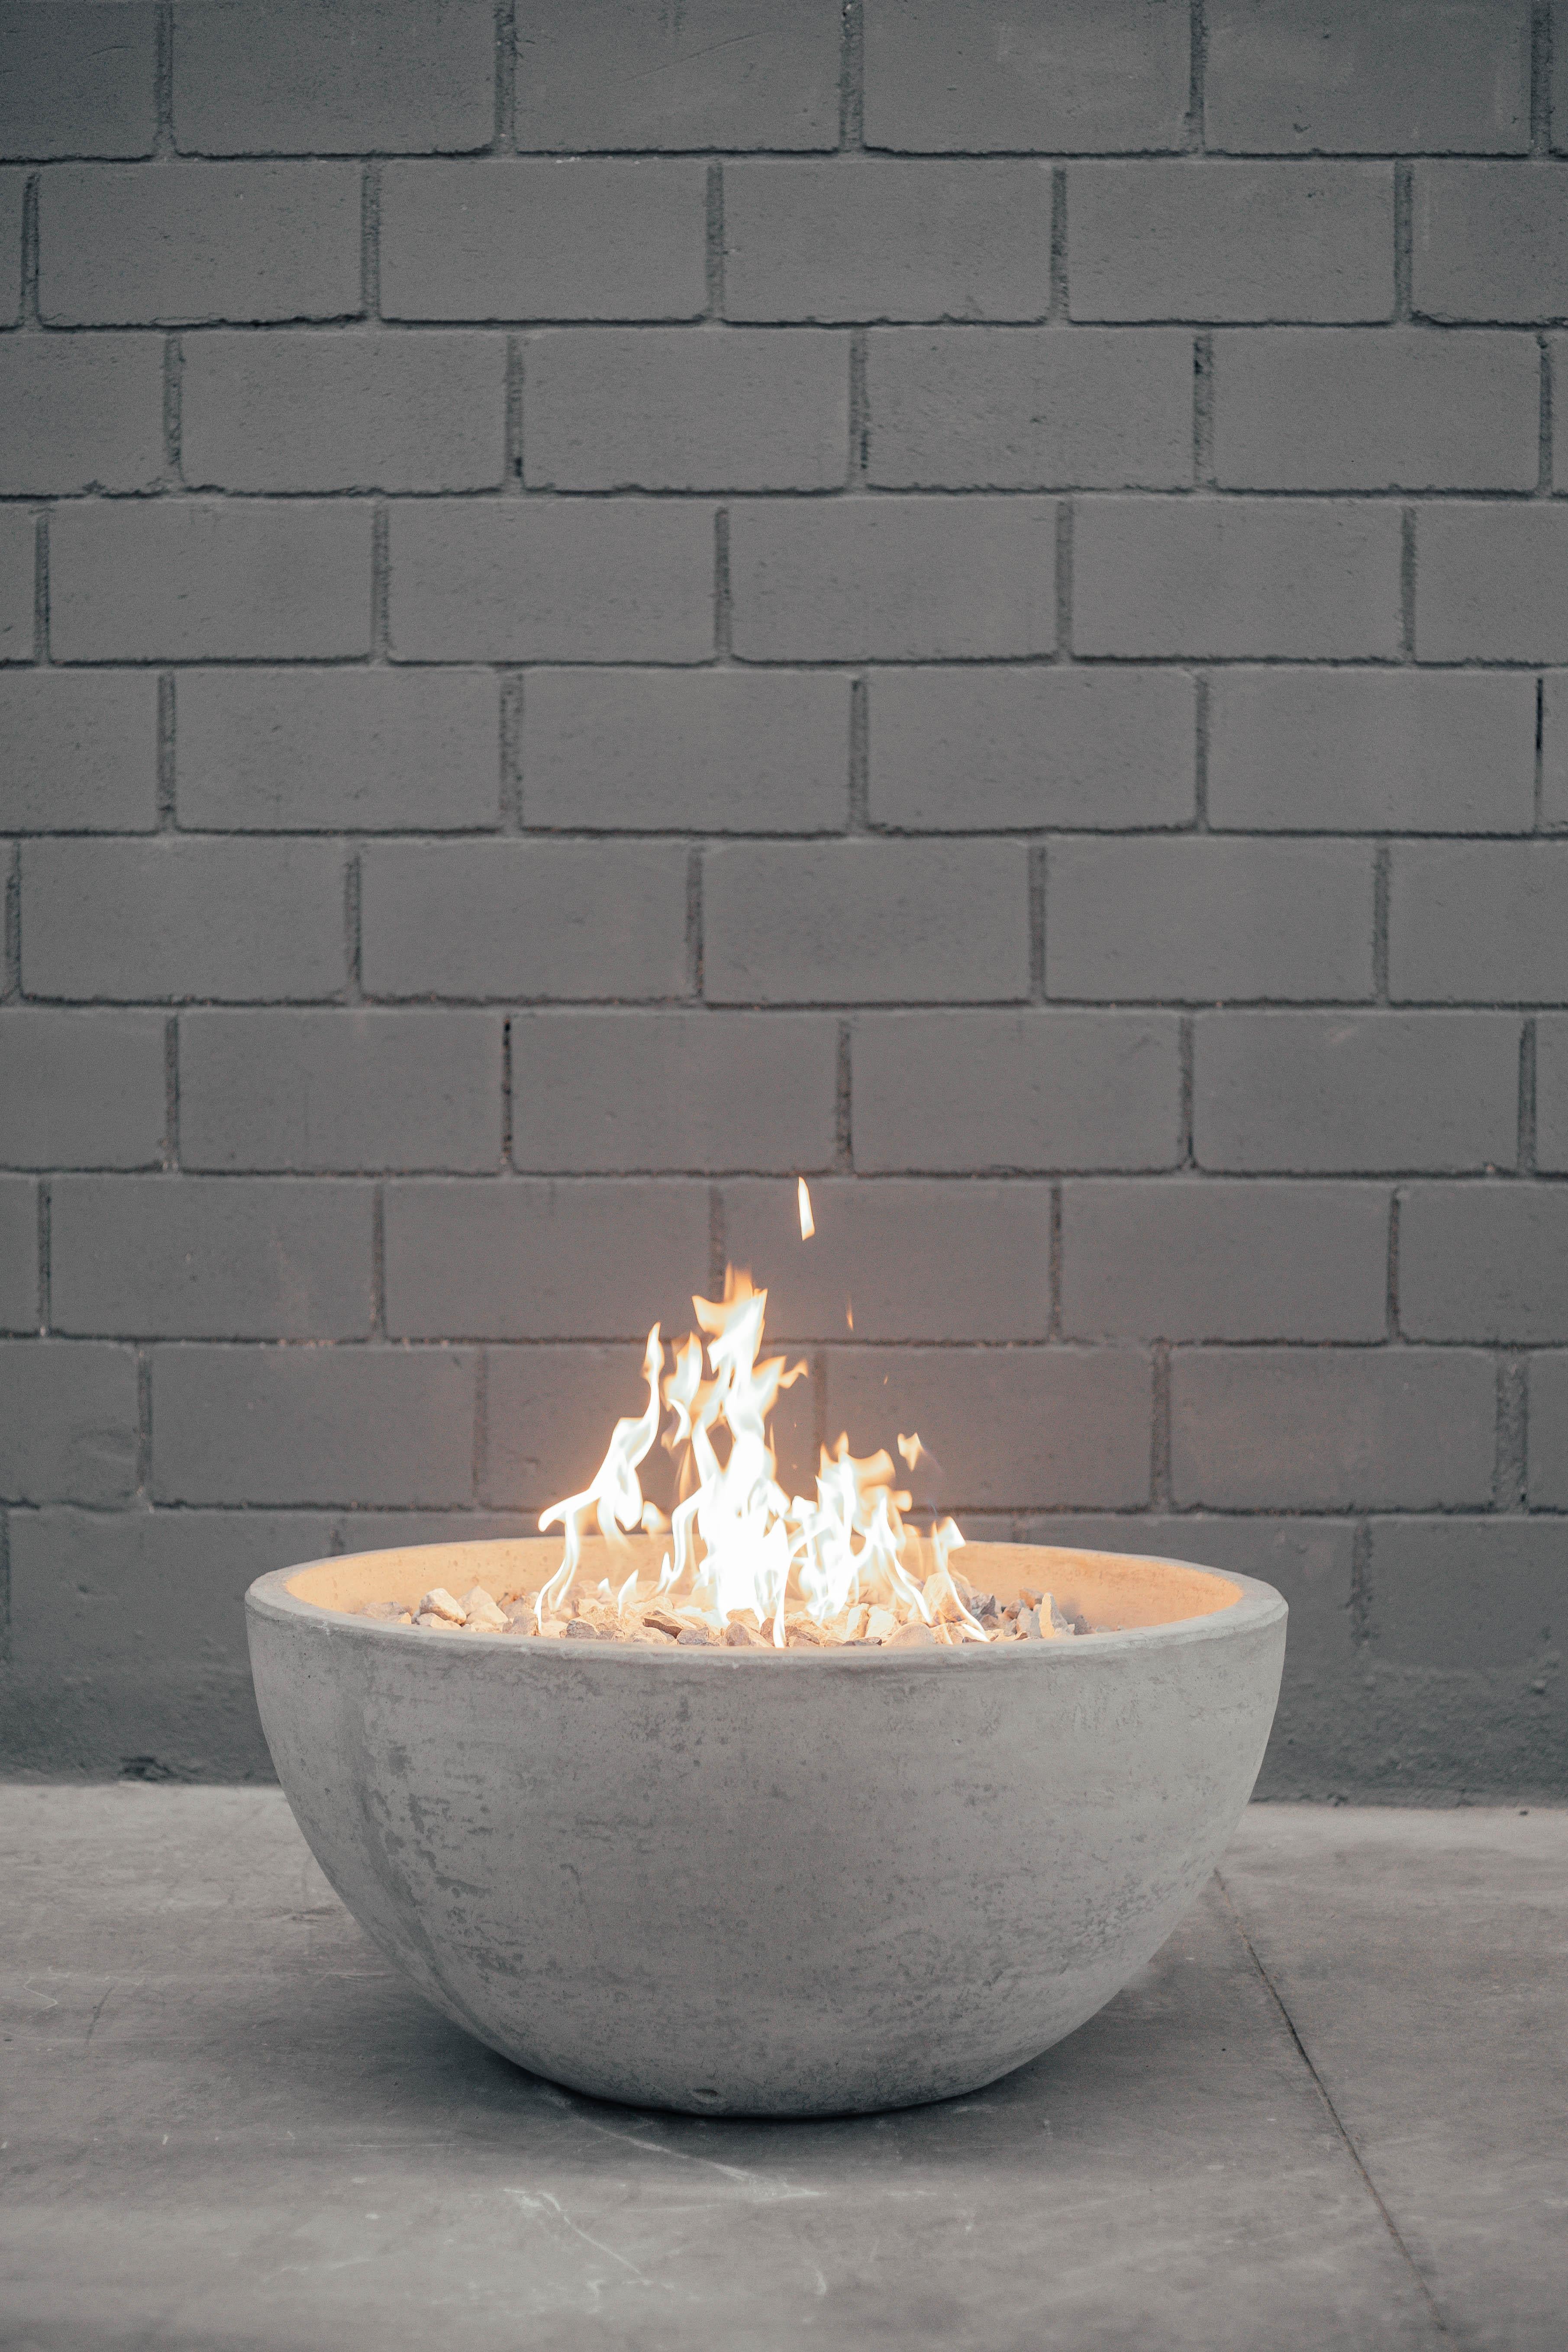 Jolla uno fire bowl by Andres Monnier
Dimensions: Diameter 90cm x height 45cm 
Materials: Stainless steel. Concrete. 
Technique: Polished stainless steel. Polished concrete. 

The design of the Concretus Collection handmade concrete pieces. All